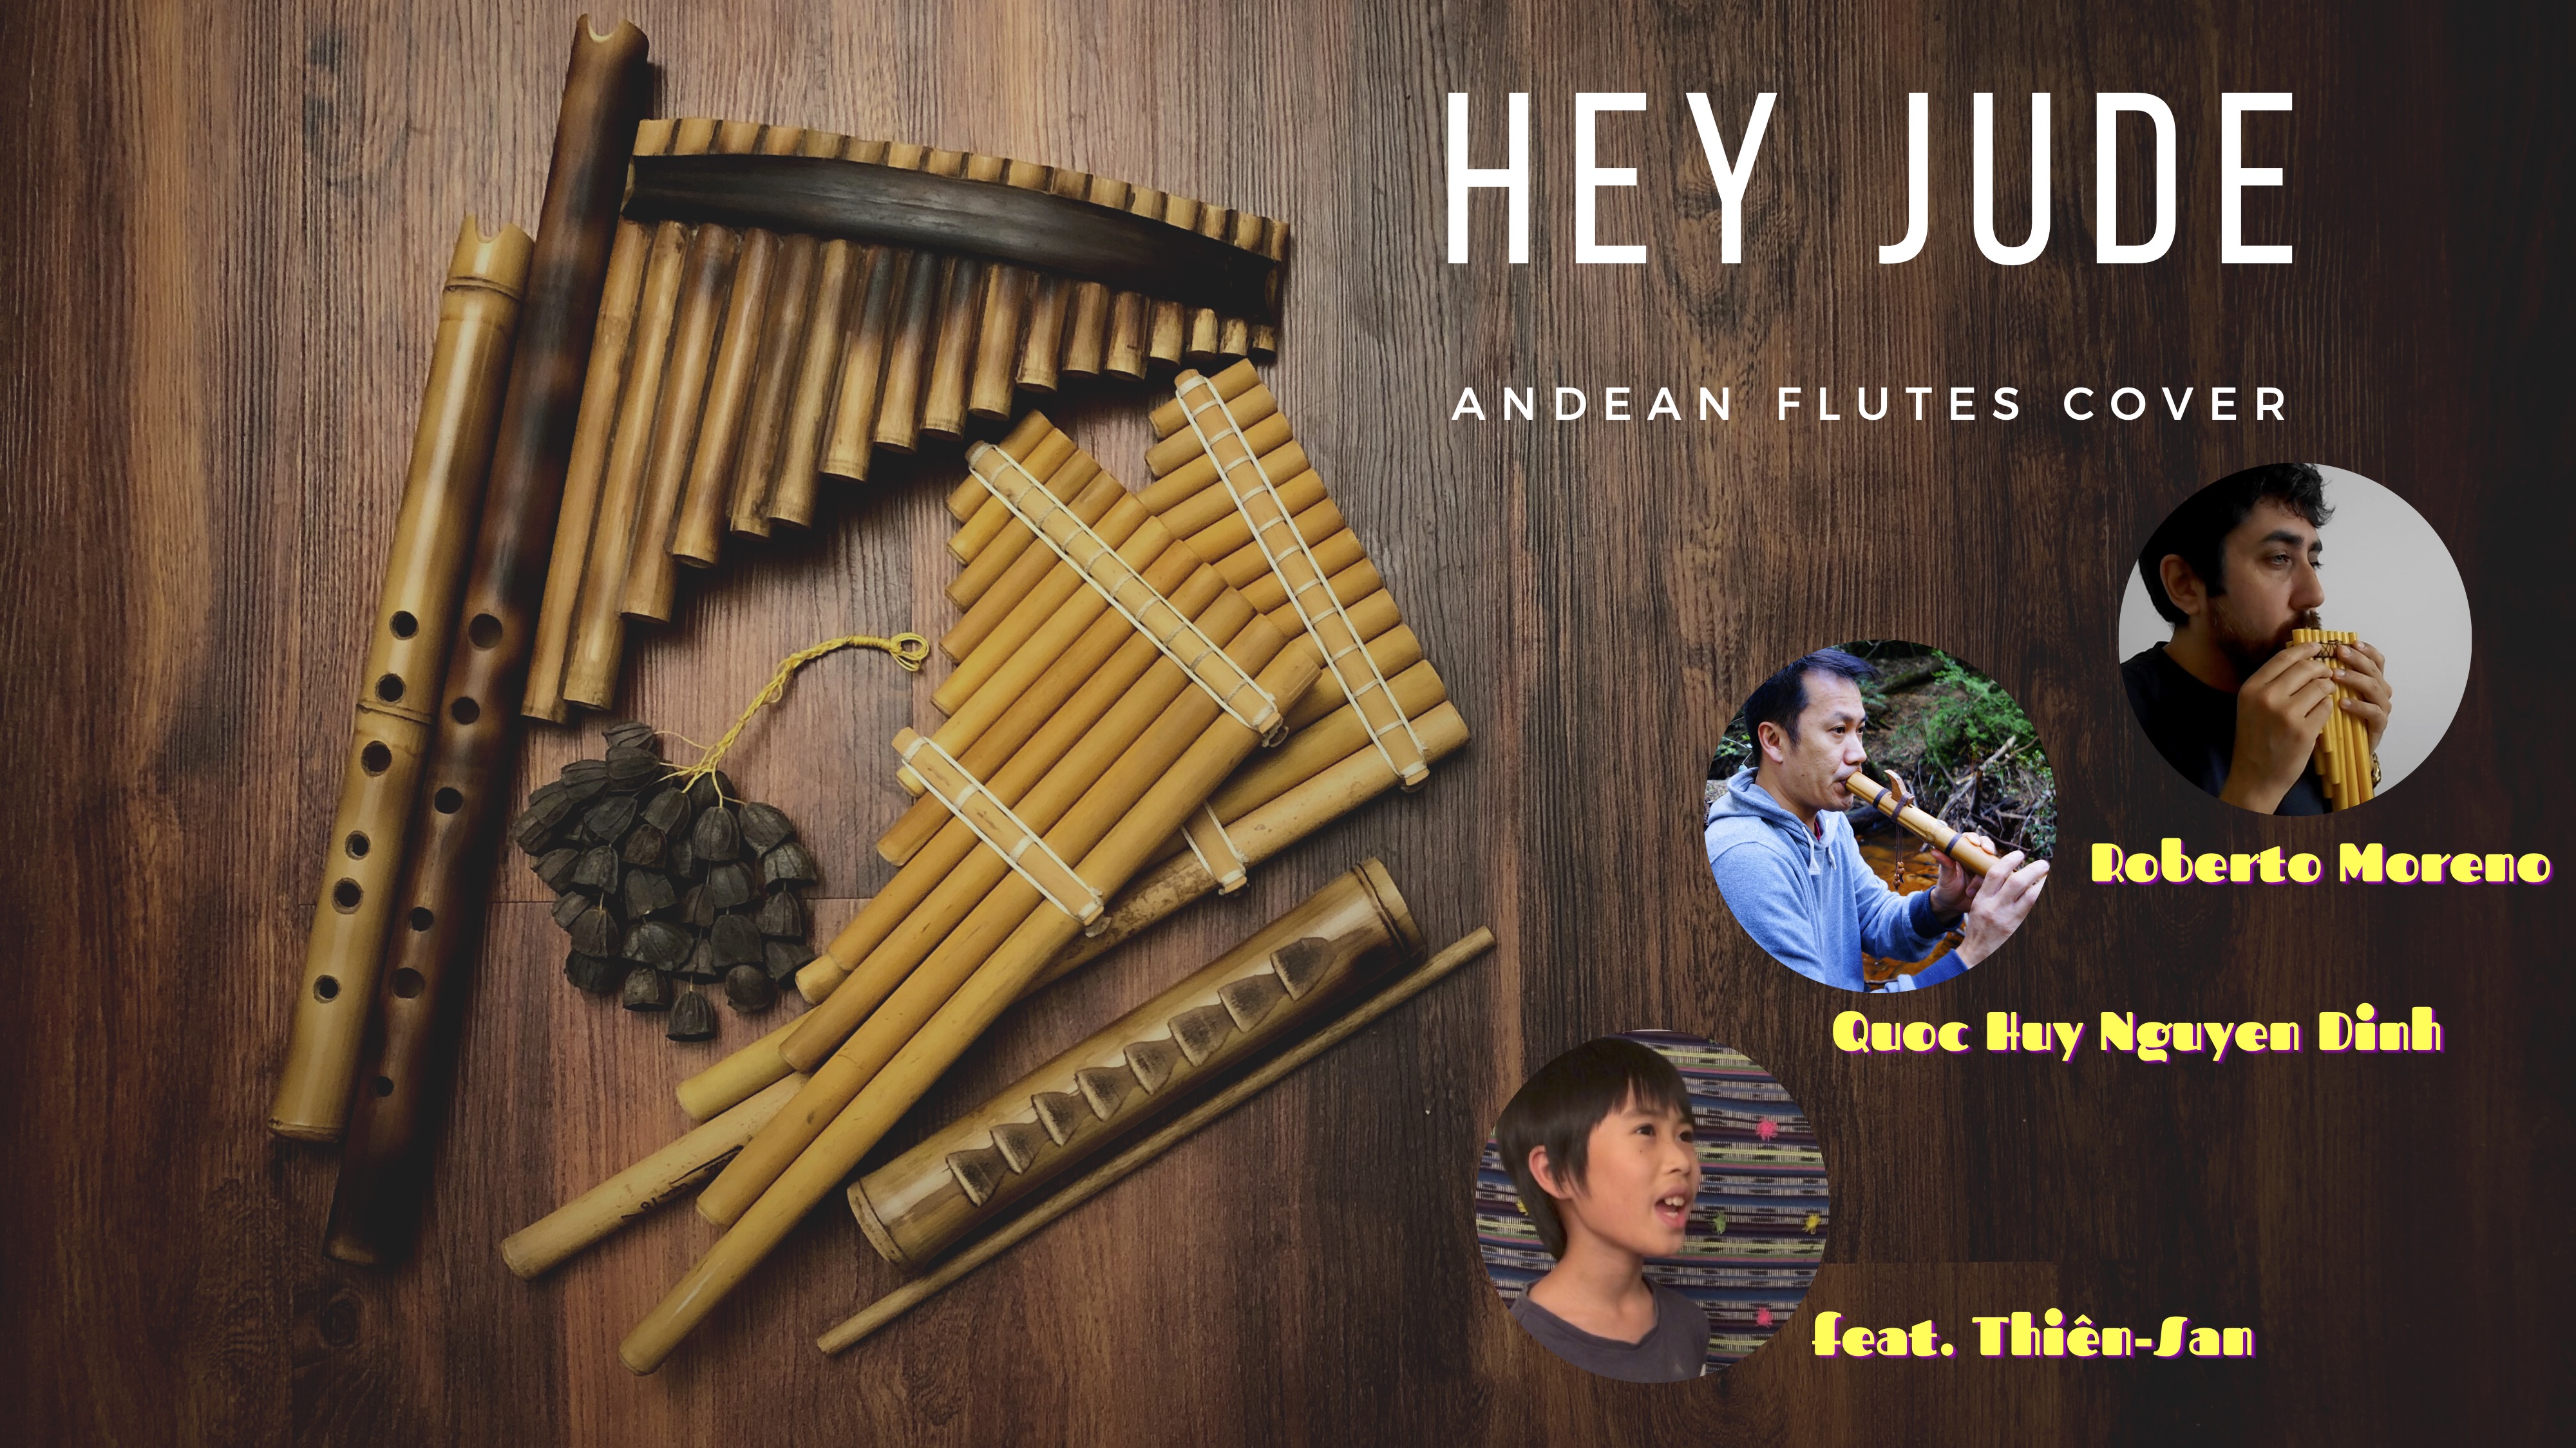 Hey Jude - Andean Flutes Cover.jpg